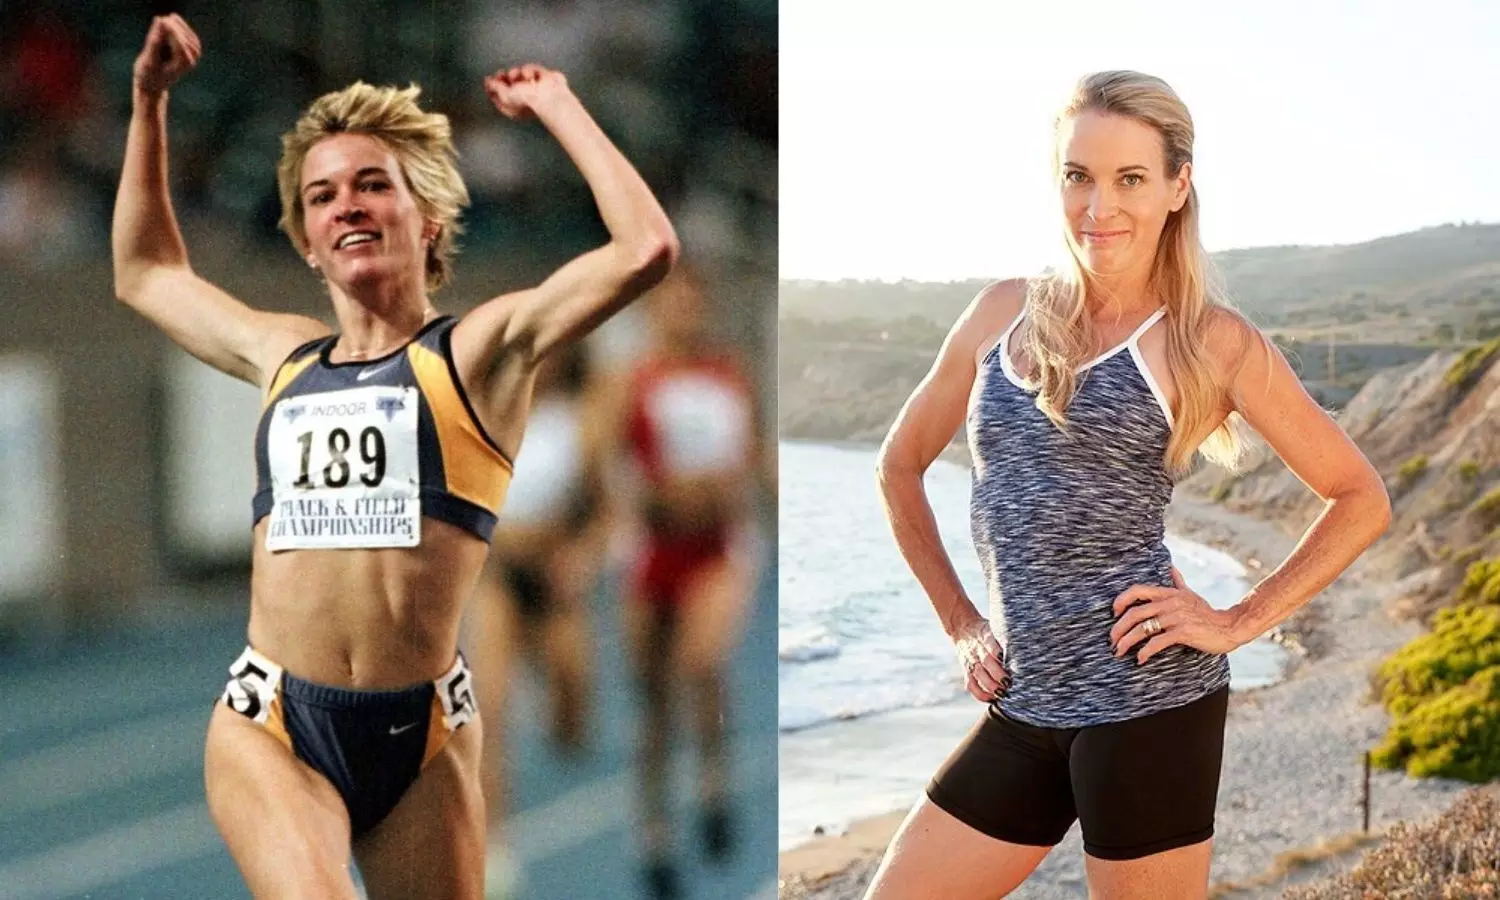 Suzy Hamilton â€” The story of an Olympics runner who resorted to prostitution